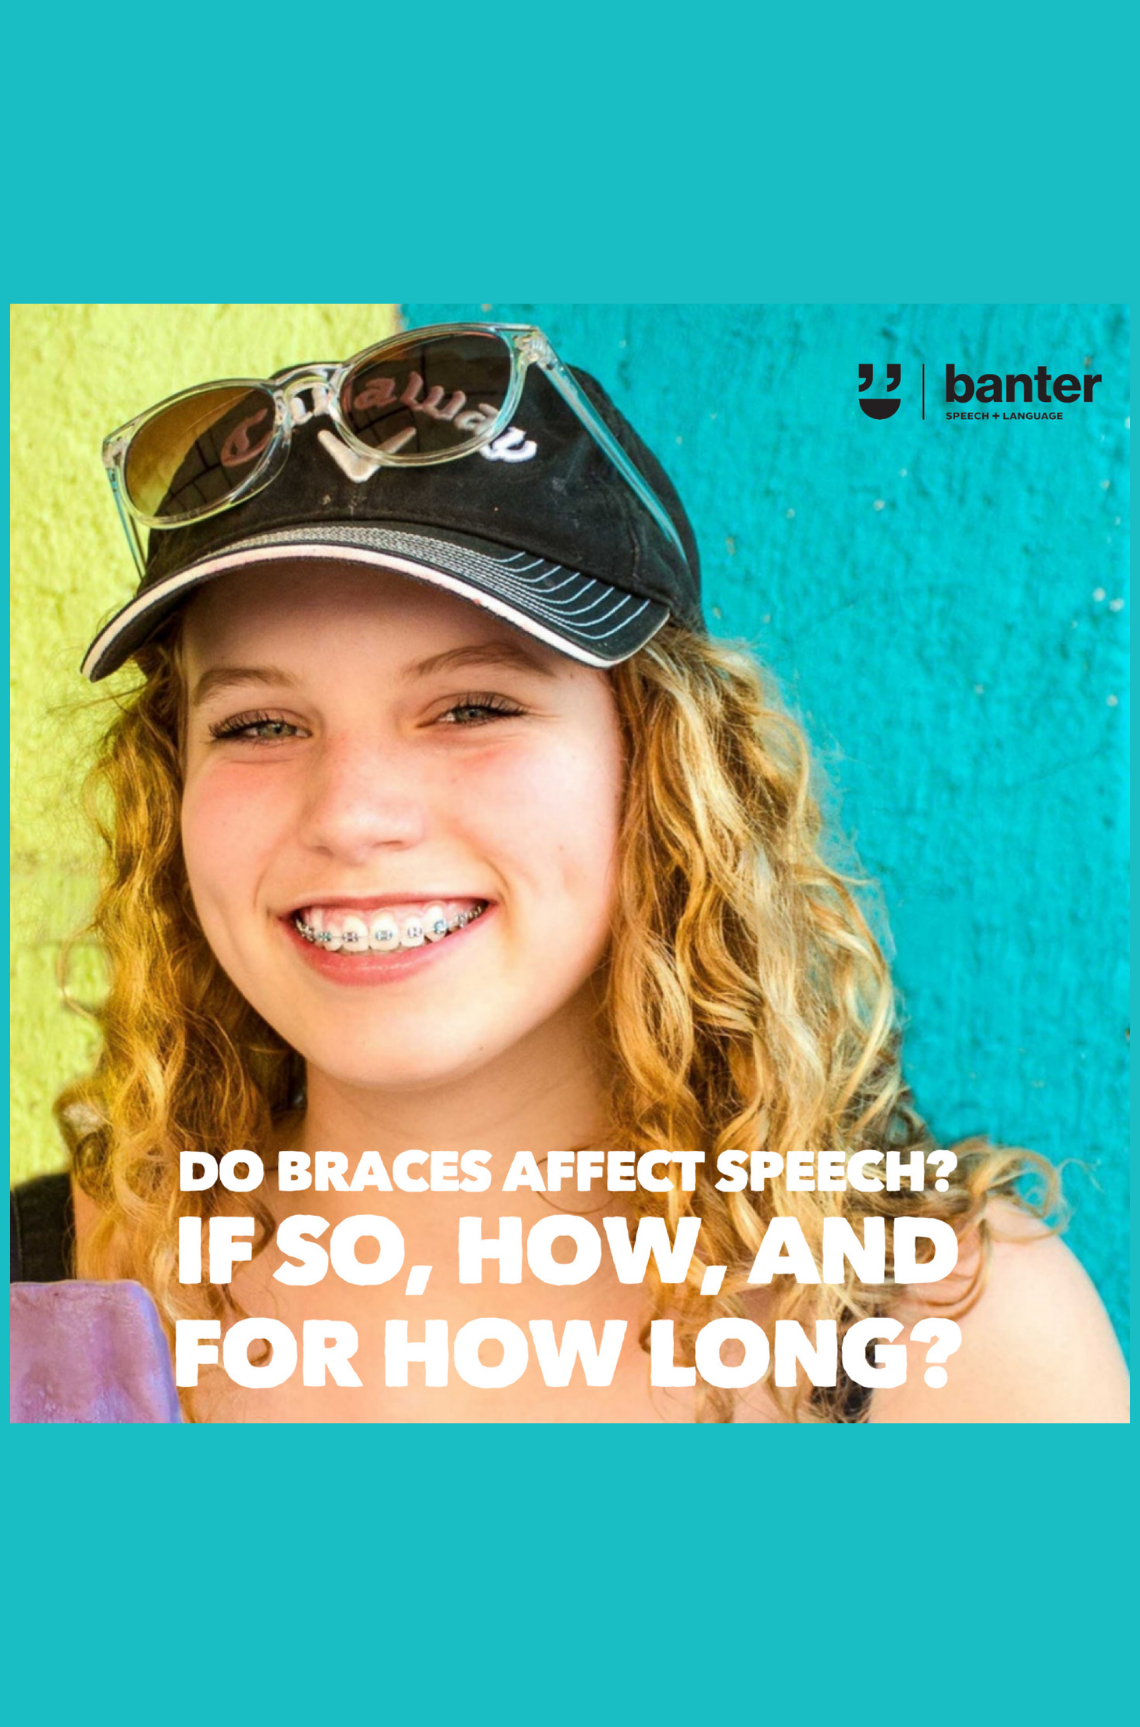 Do braces affect speech? If so, how, and for how long?